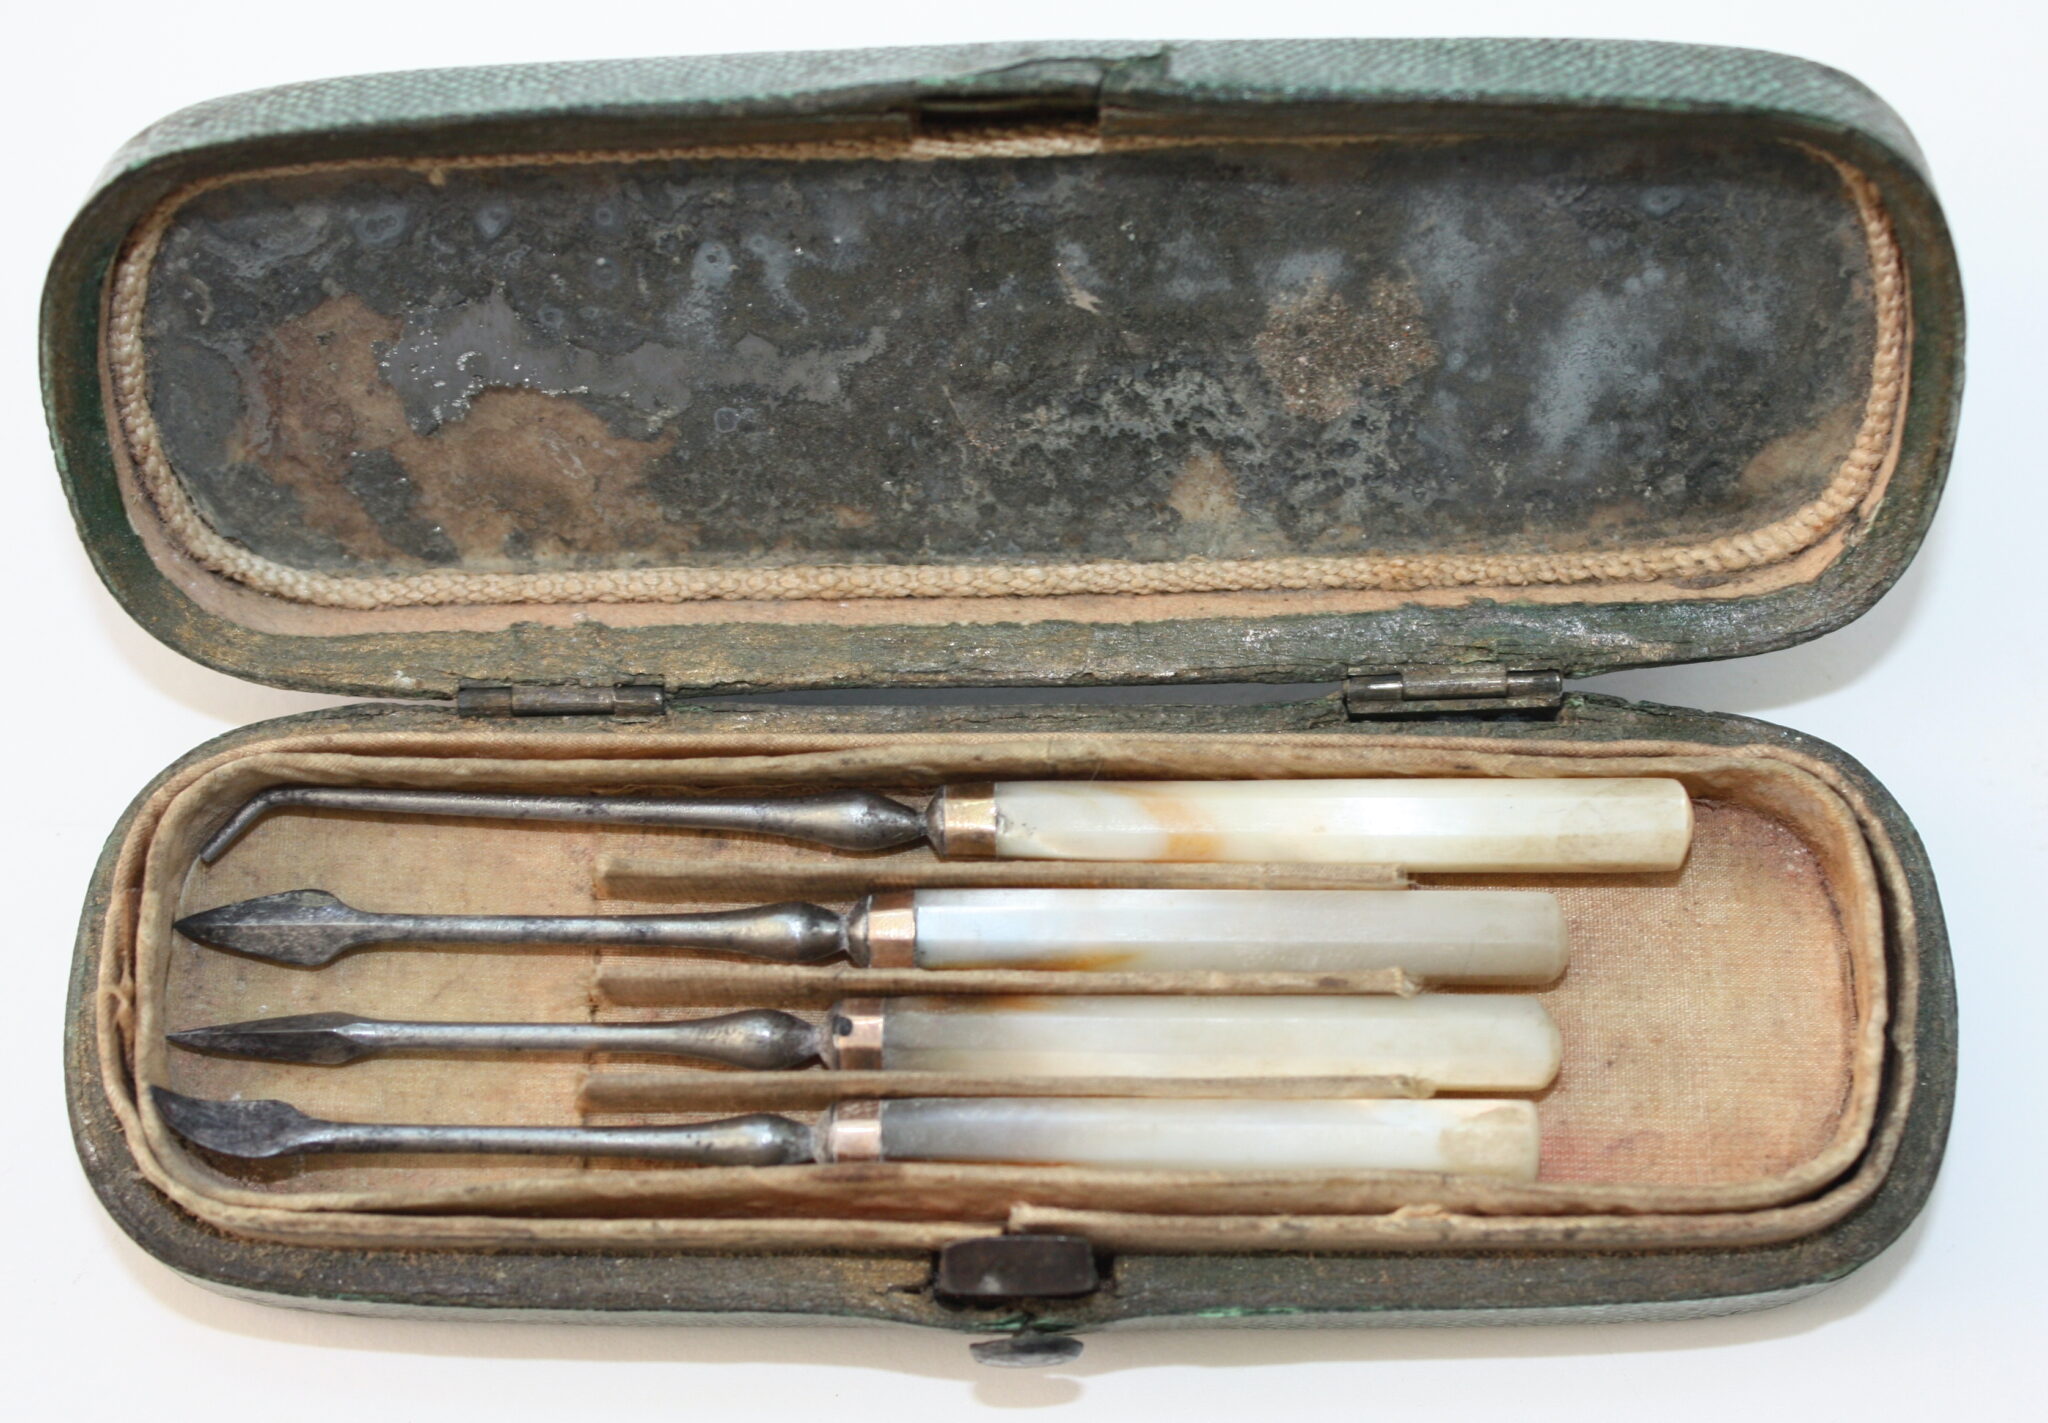 A set of 4 mother of pearl handled dental scalers 18Th Century in shagreen case